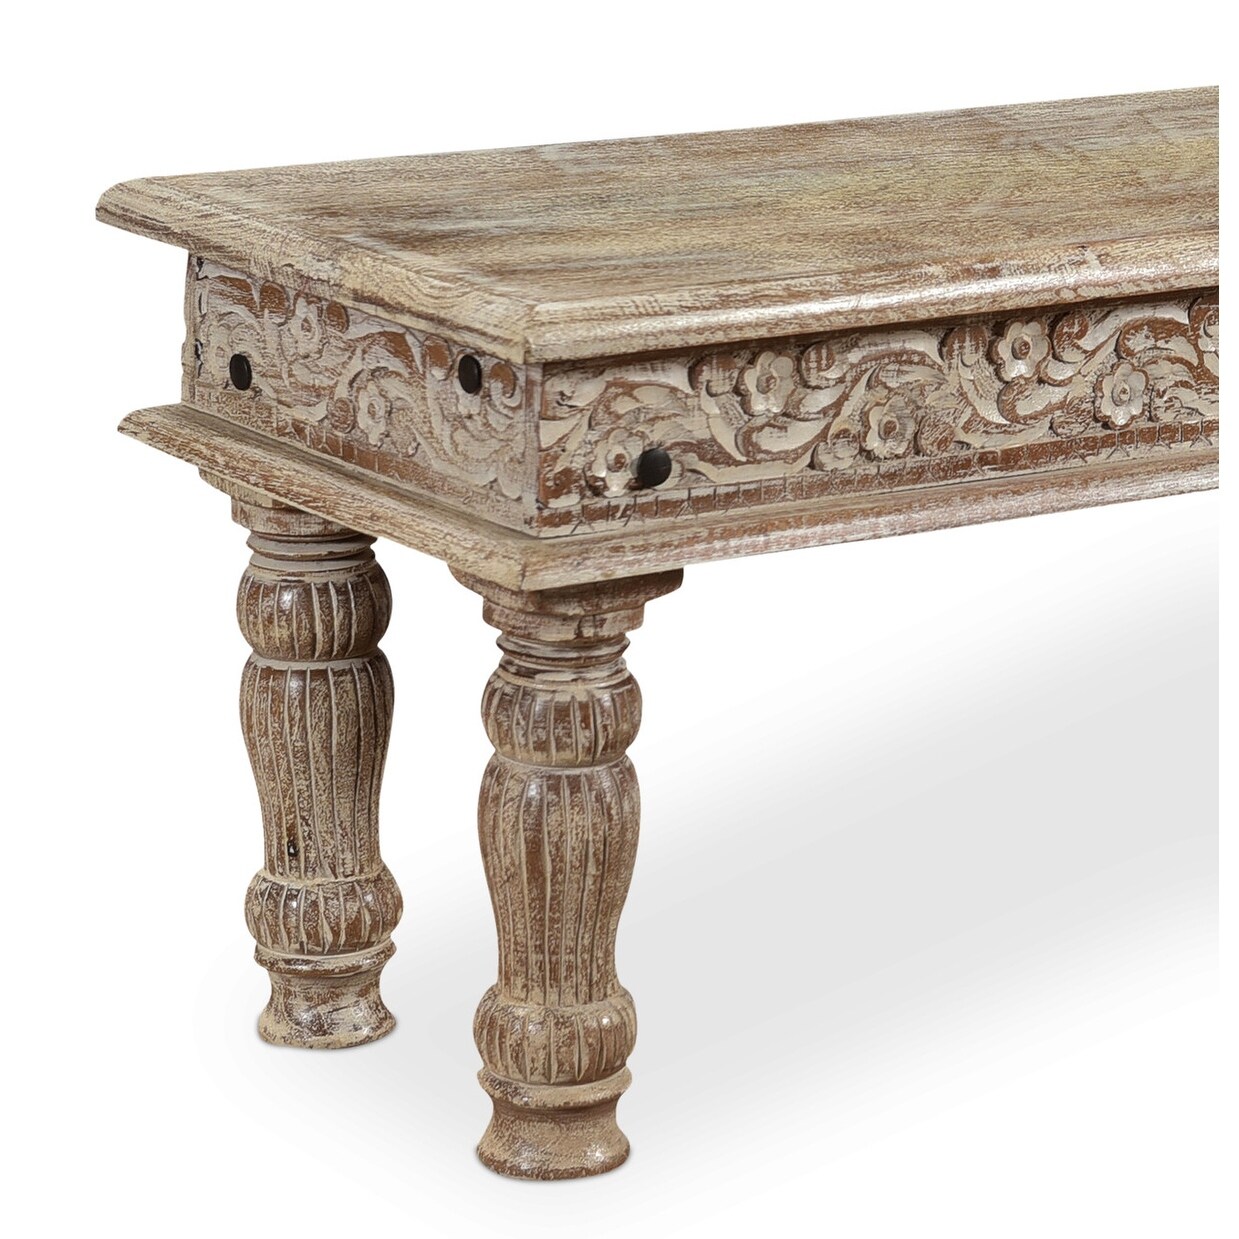 Driftwood Carved 3 Piece Dining Table set - 6 Seater